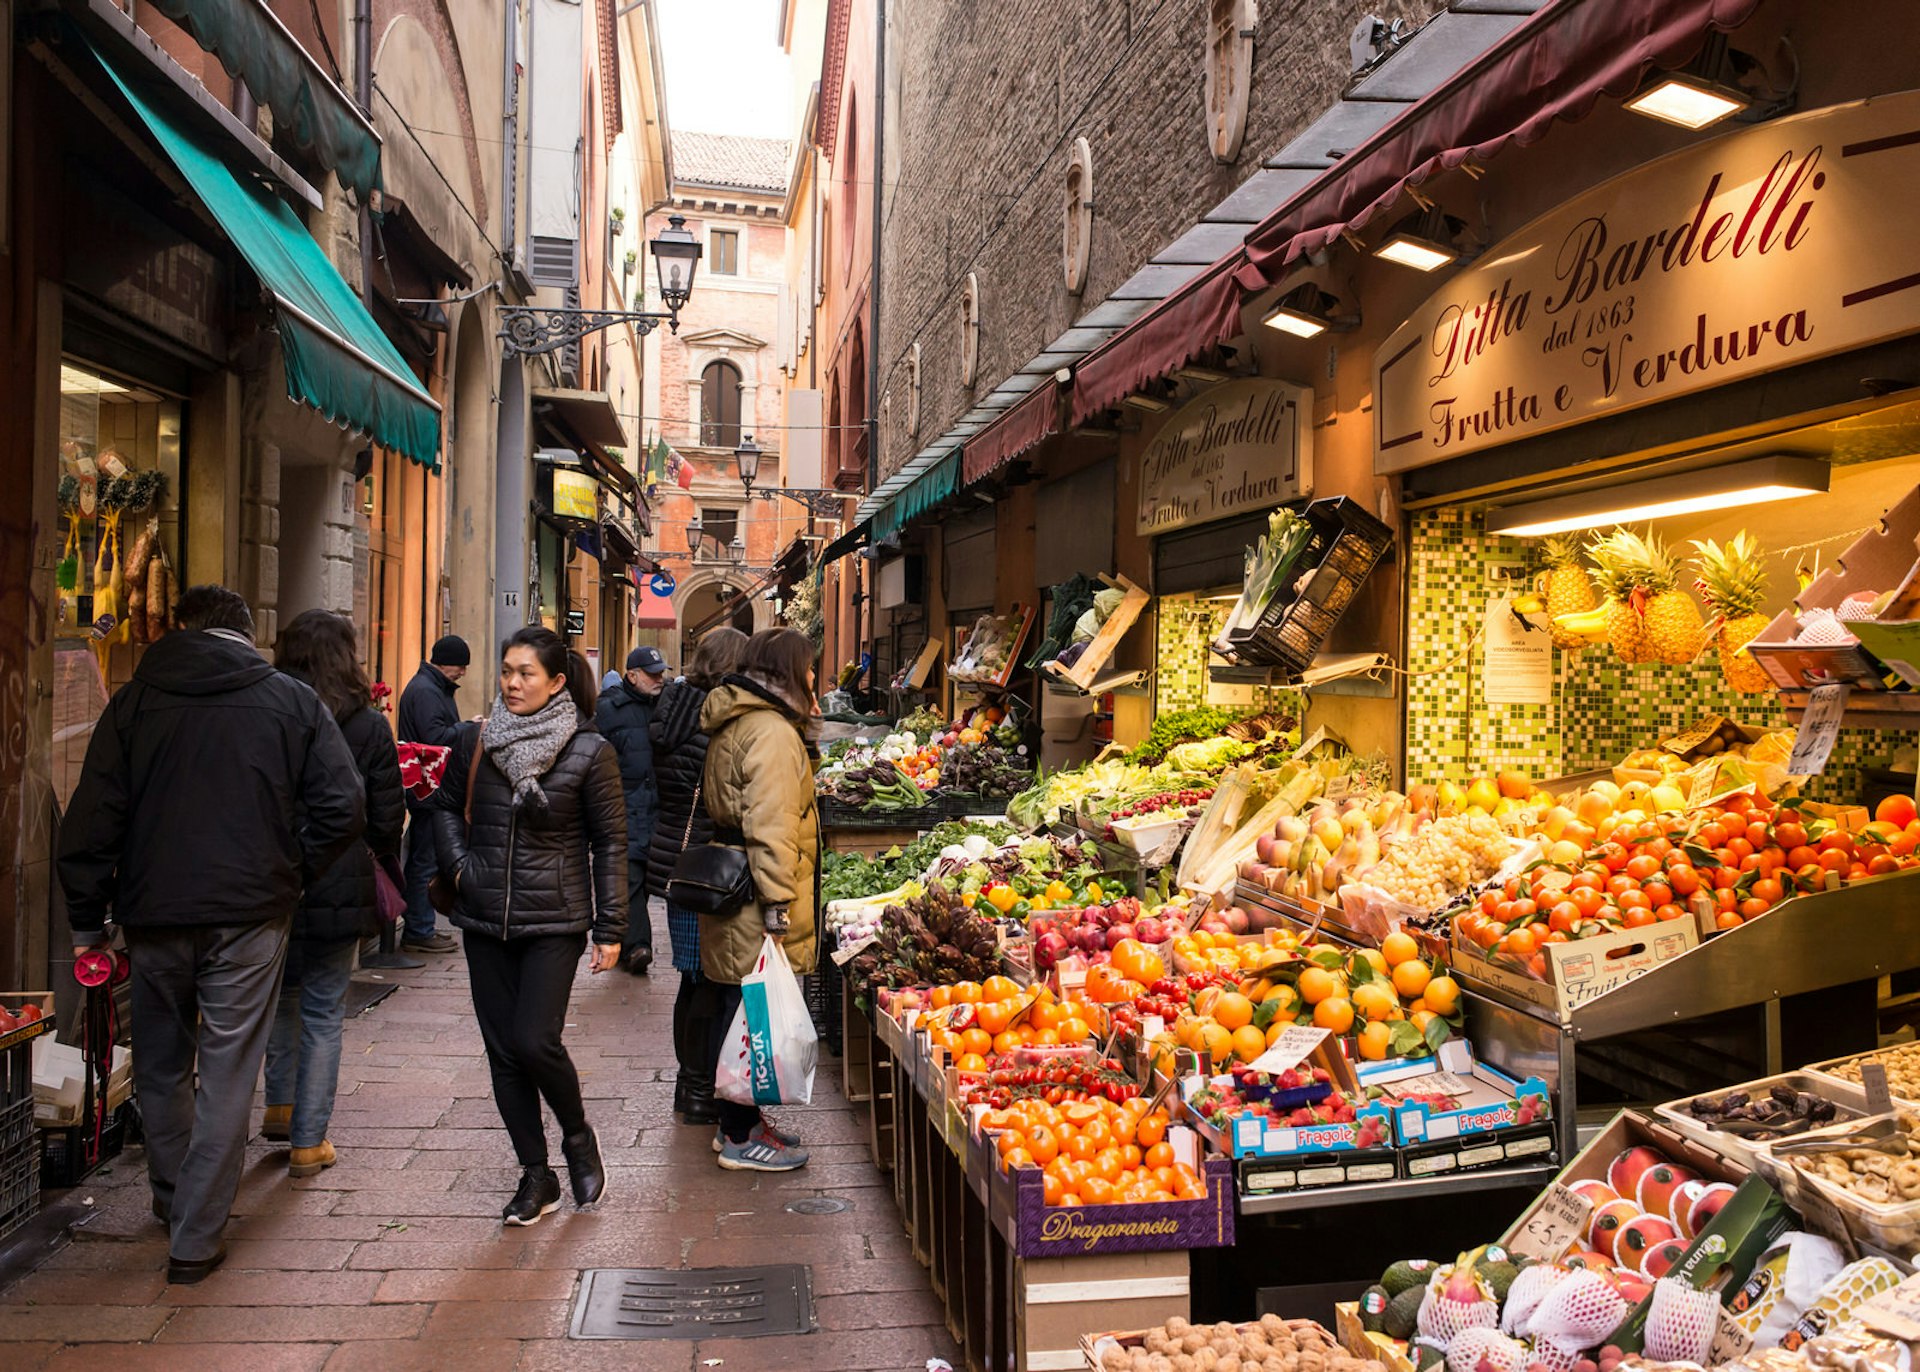 Traditional stores and food stalls in the Via Pescherie Vecchie, a famous alley in the medieval heart of Bologna, Emilia-Romagna © DrimaFilm / Shutterstock